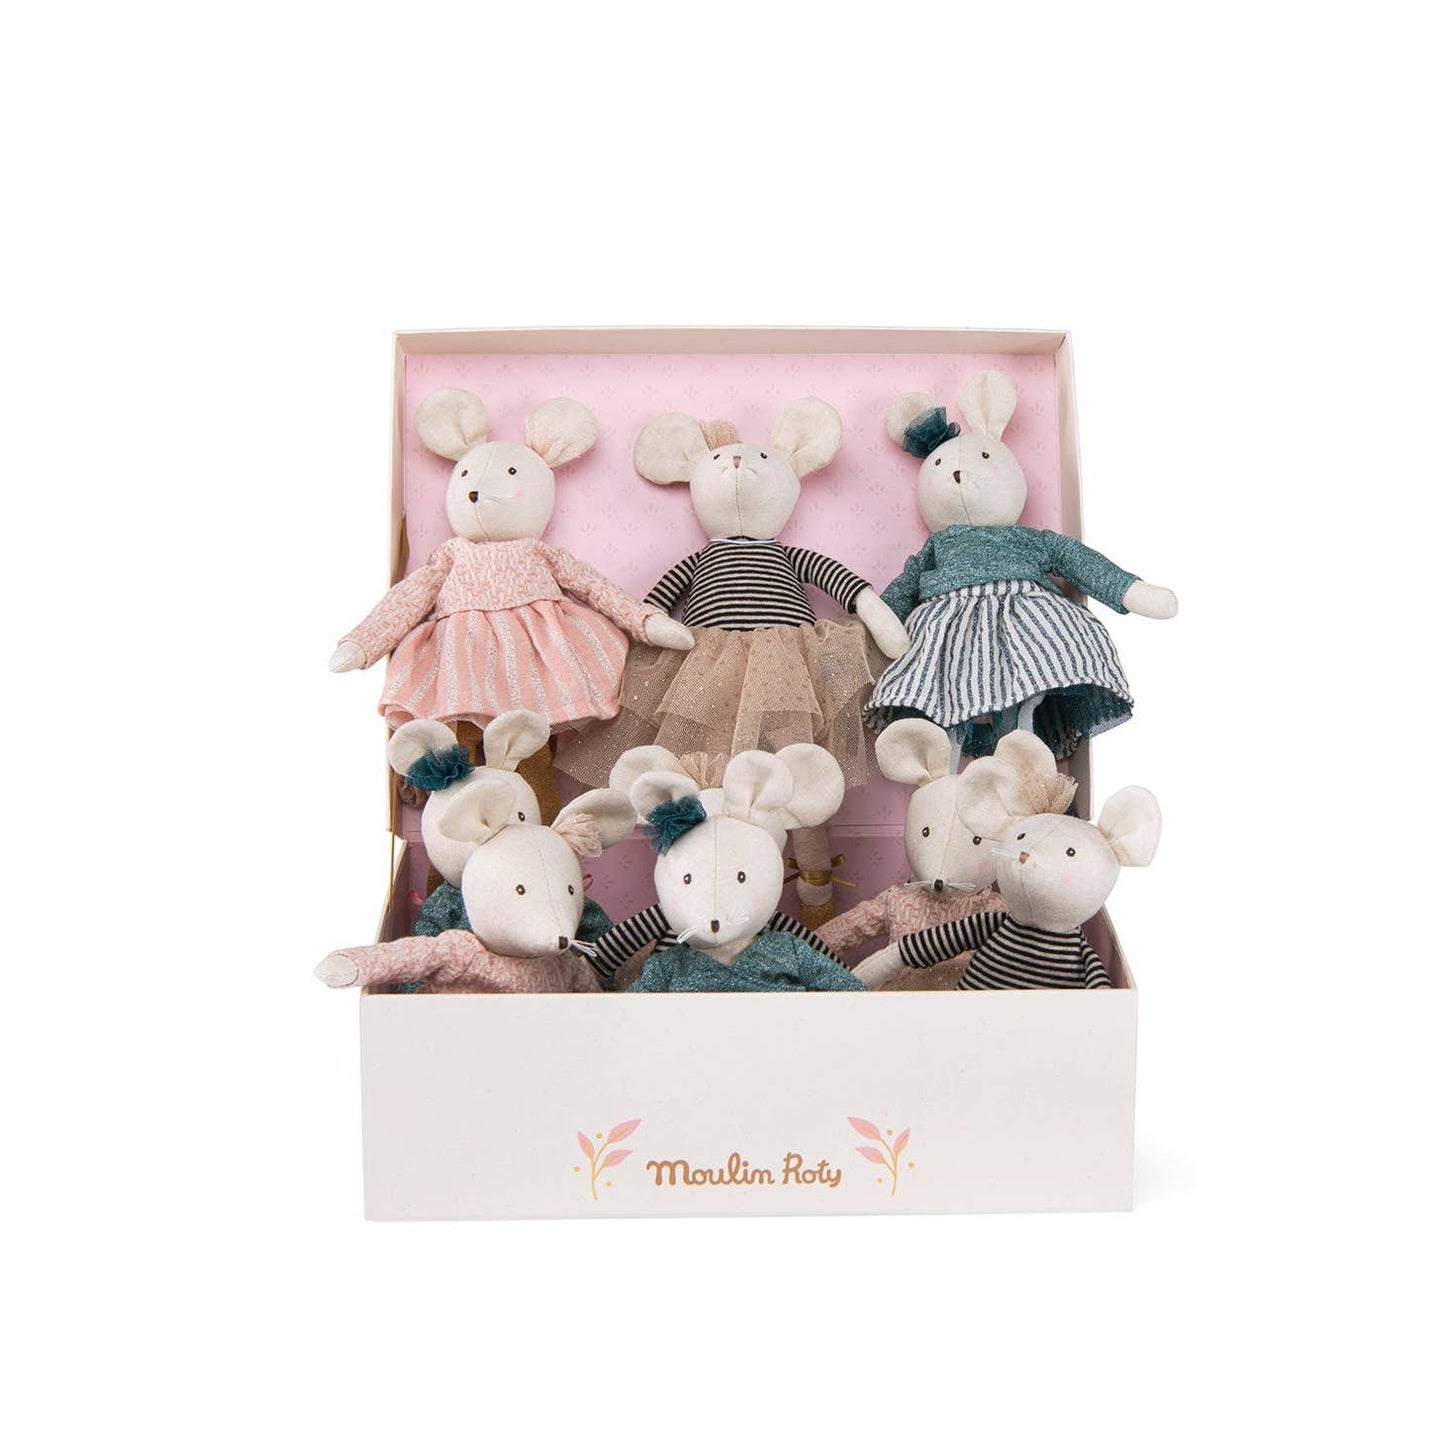 Ballerina Mouse is ready to dance!   Each mouse has delicately powdered cheeks, & colorful, patterned dance attire.   Ready, set, twirl! Moulin routy ballerina mouse\